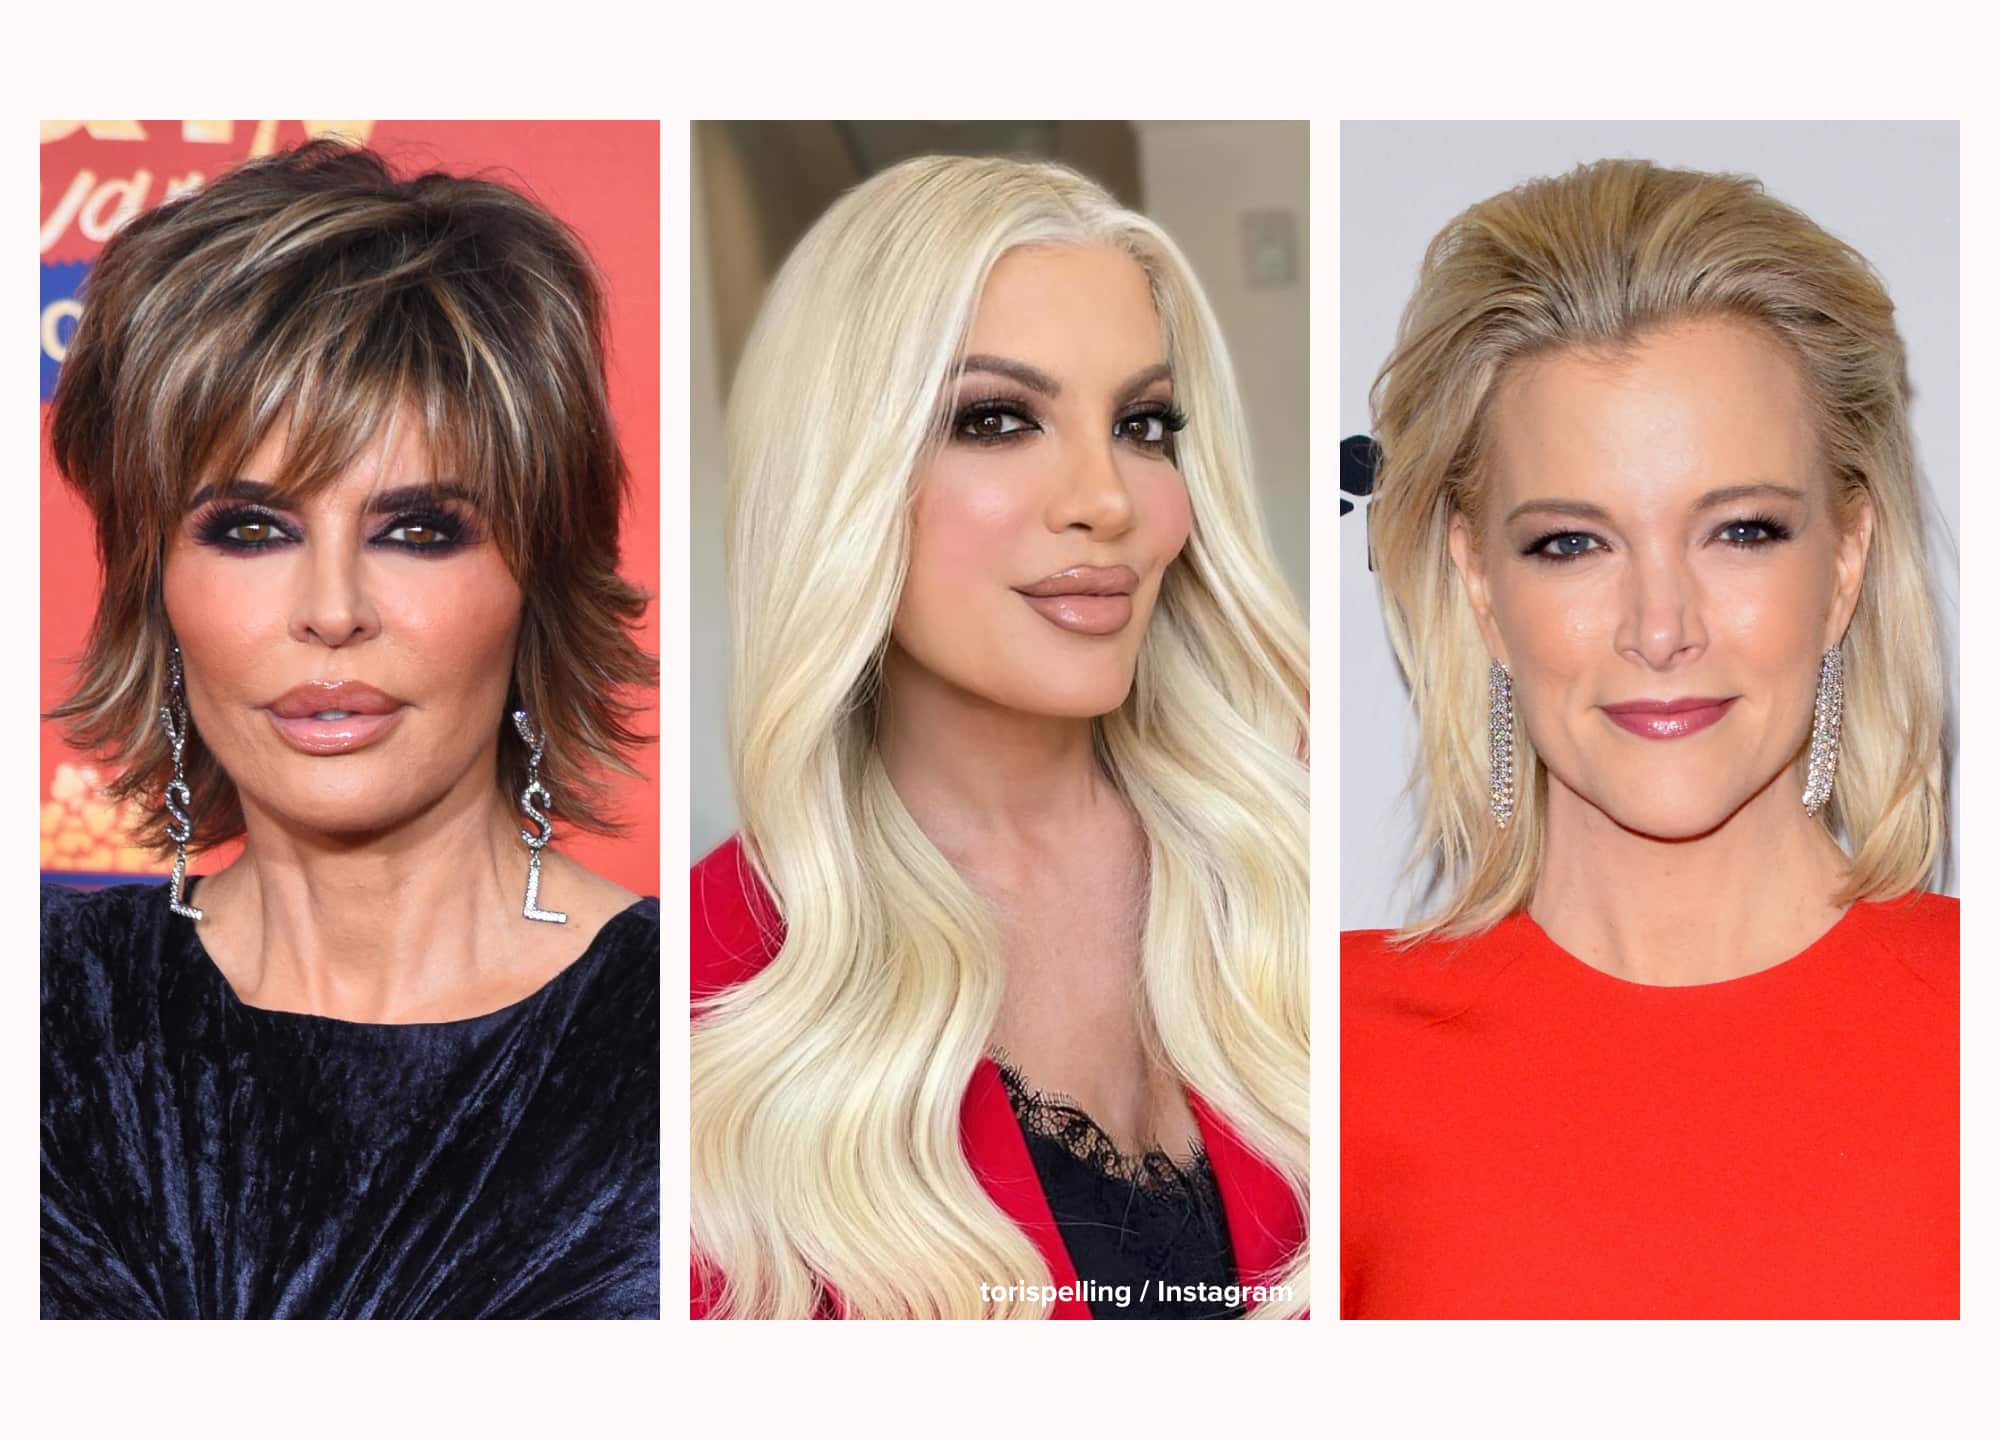 This Month in Aesthetics: Lisa Rinna Says Skinvive Was “Not Good” for Her, Counterfeit Botox Hits the U.S., Tori Spelling Reveals Mounjaro Weight Loss, and More - article image